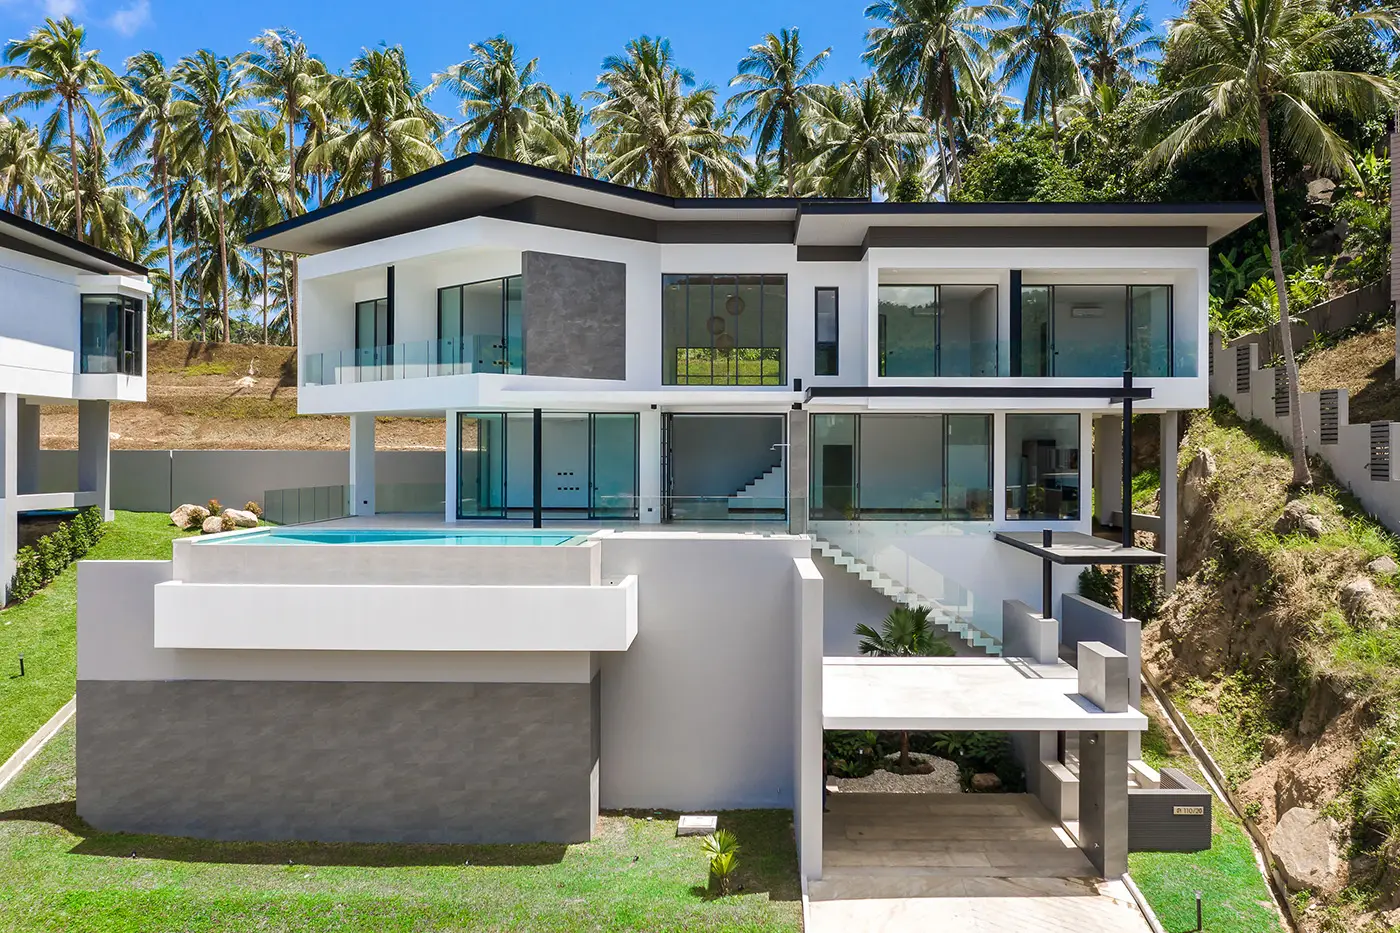 Verano Residence - Contemporary 4+1 Bedroom Seaview Pool Villa in Chaweng Noi for Sale: Contemporary 4+1 Bedroom Seaview Pool Villa in Chaweng Noi for Sale